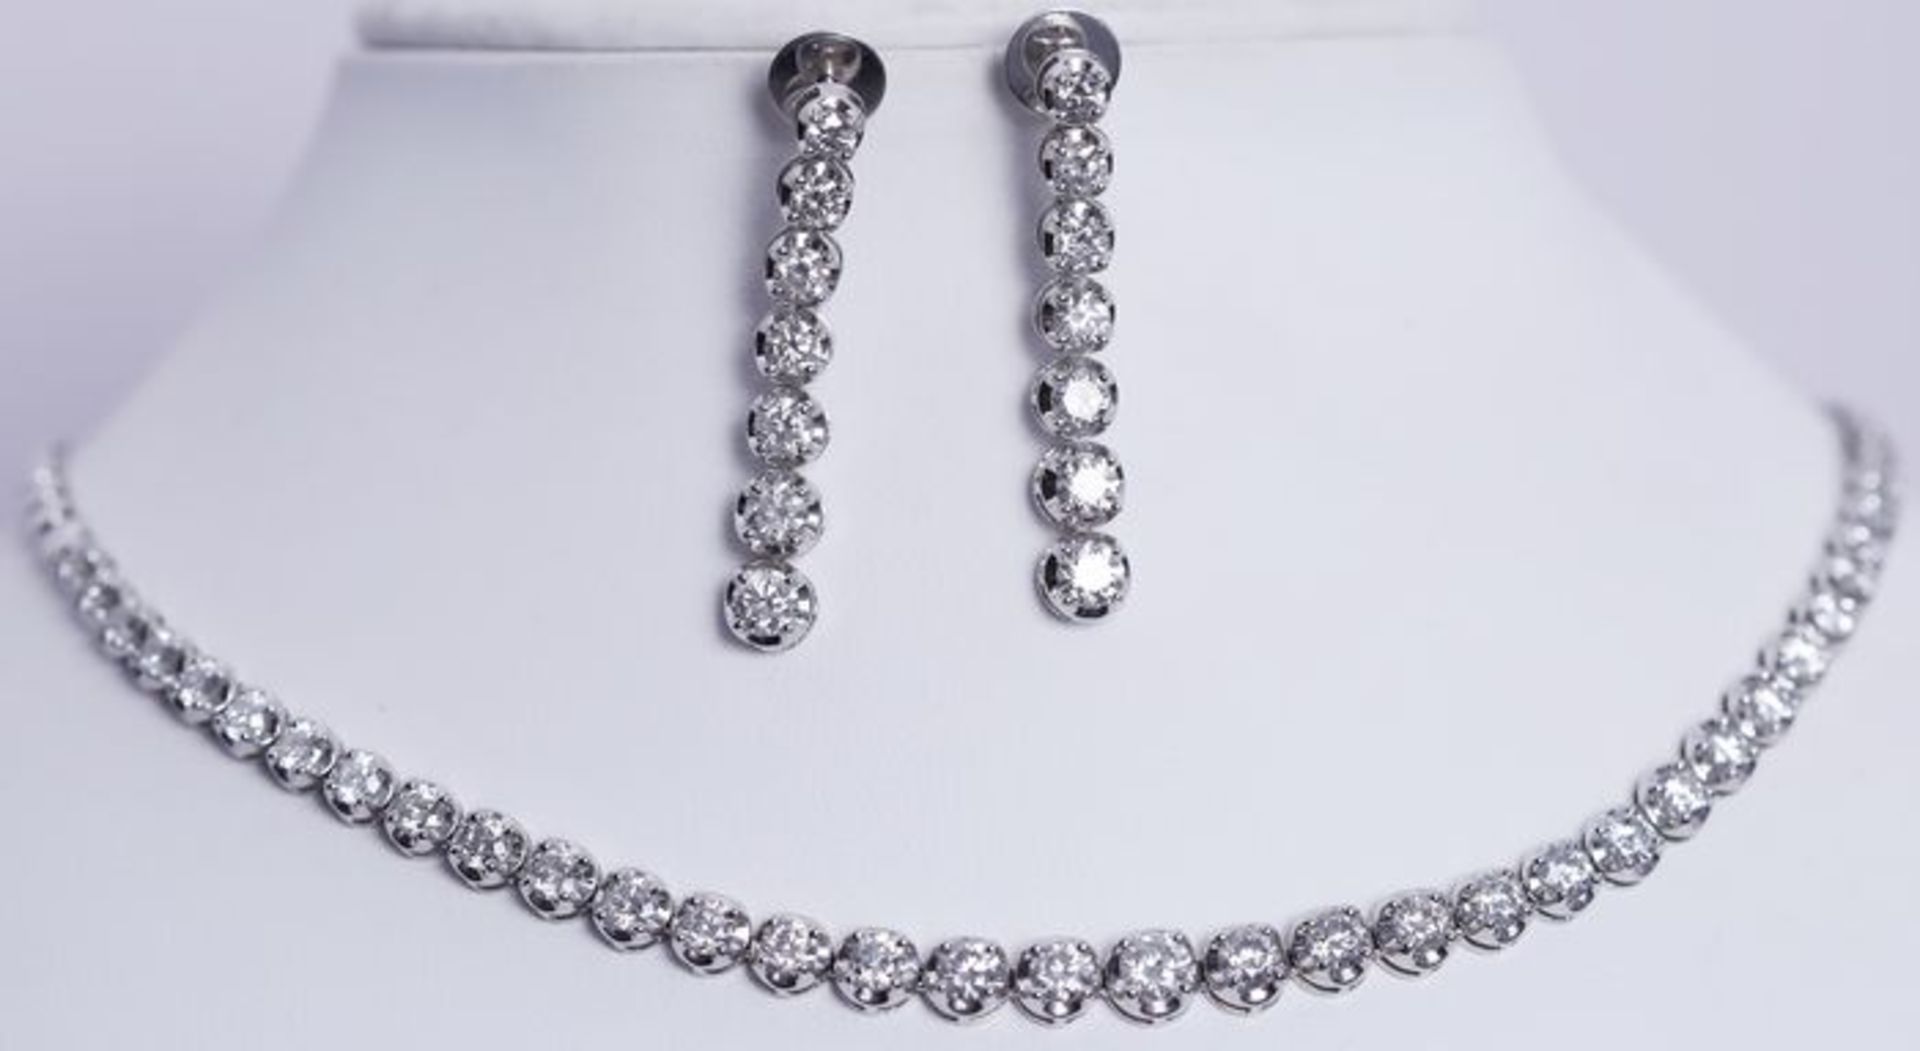 14 K White Gold Solitaire Diamond Necklace & Earrings - Image 3 of 4